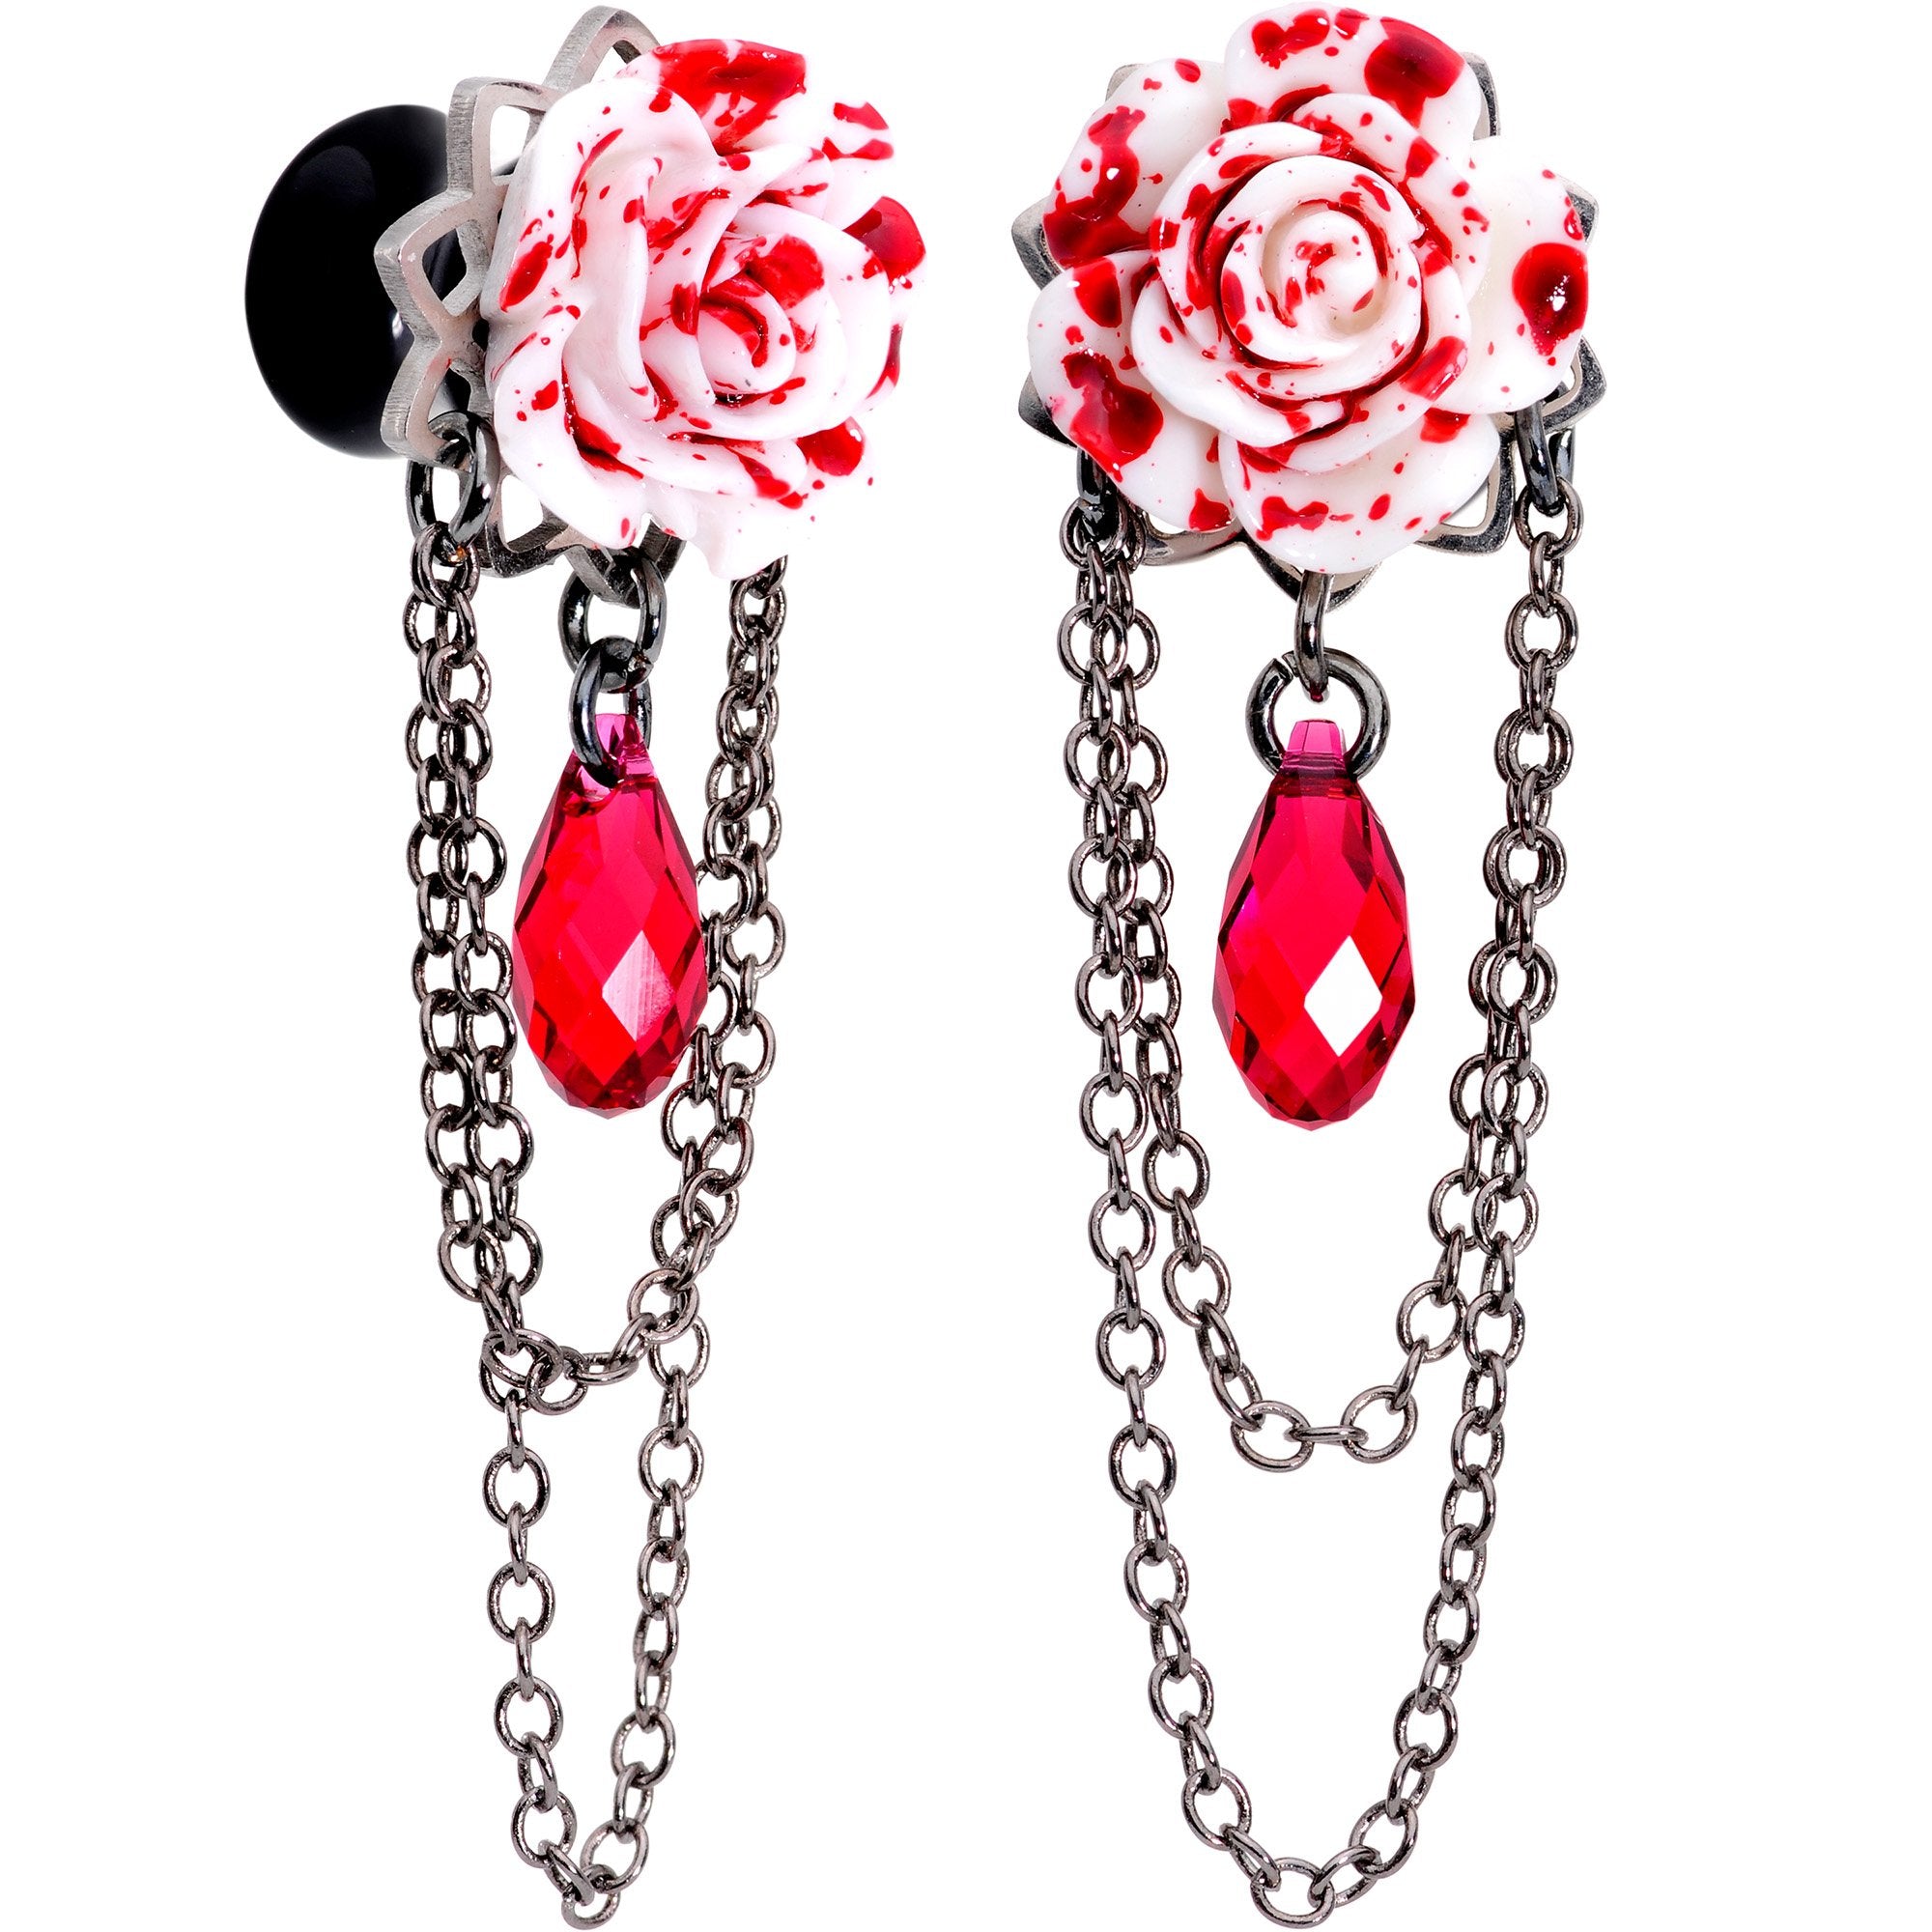 Blood Rose Dangle Plug Set Sizes 8mm to 20mm Created with Crystals